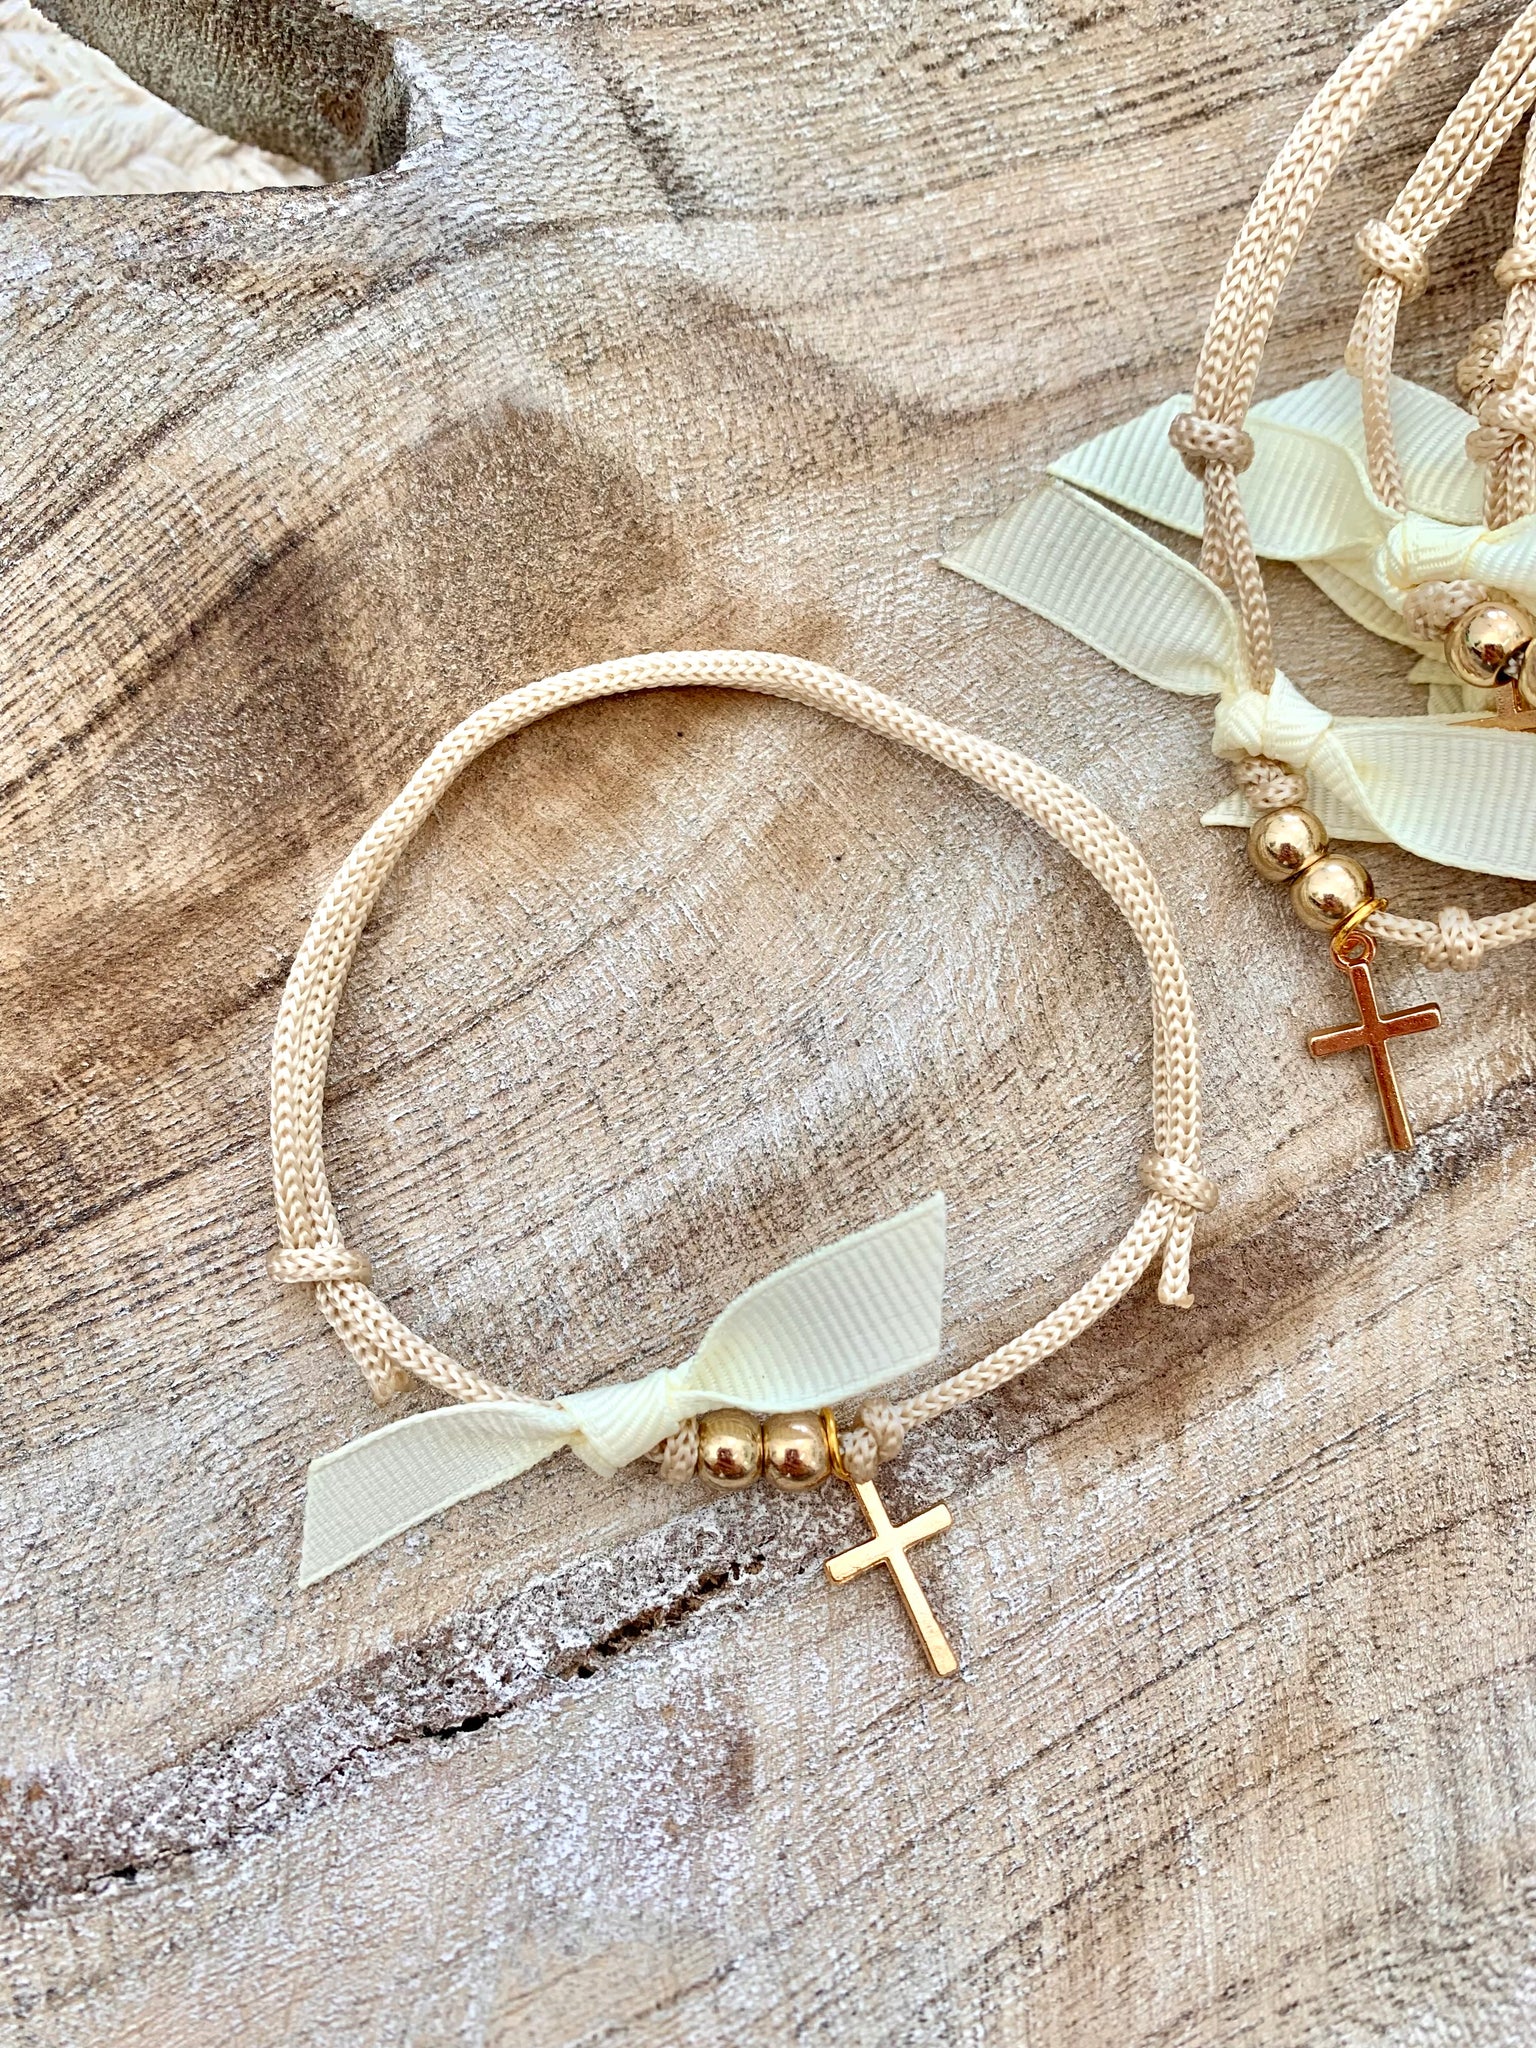 Beige and Ivory Gold Cross Bracelet Martyiko / Witness Pin